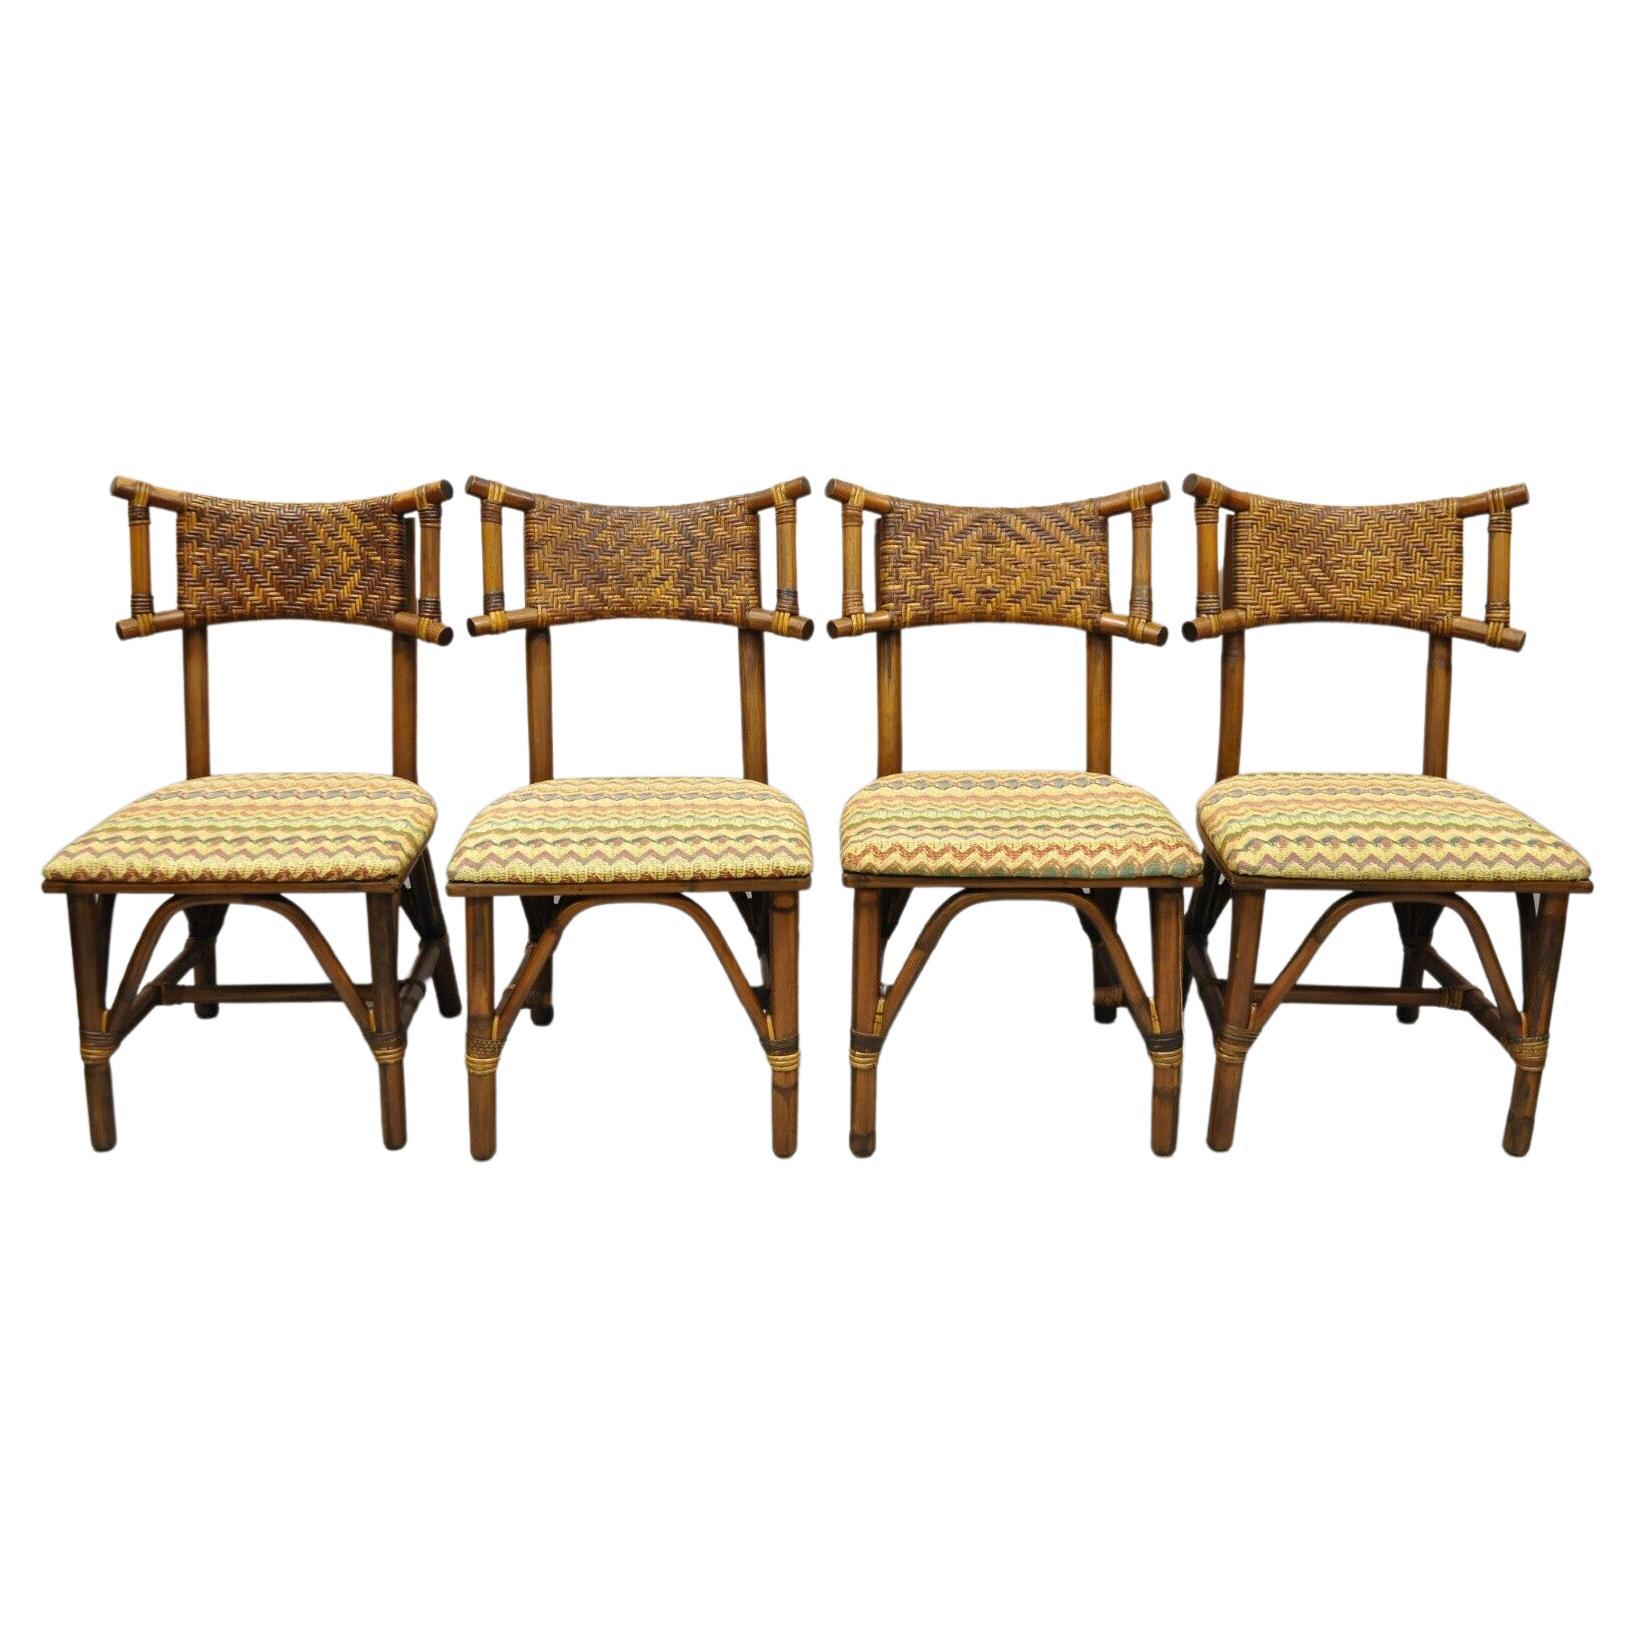 Vintage Bentwood Bamboo Rattan Tiki Hollywood Regency Dining Chairs, Set of 4